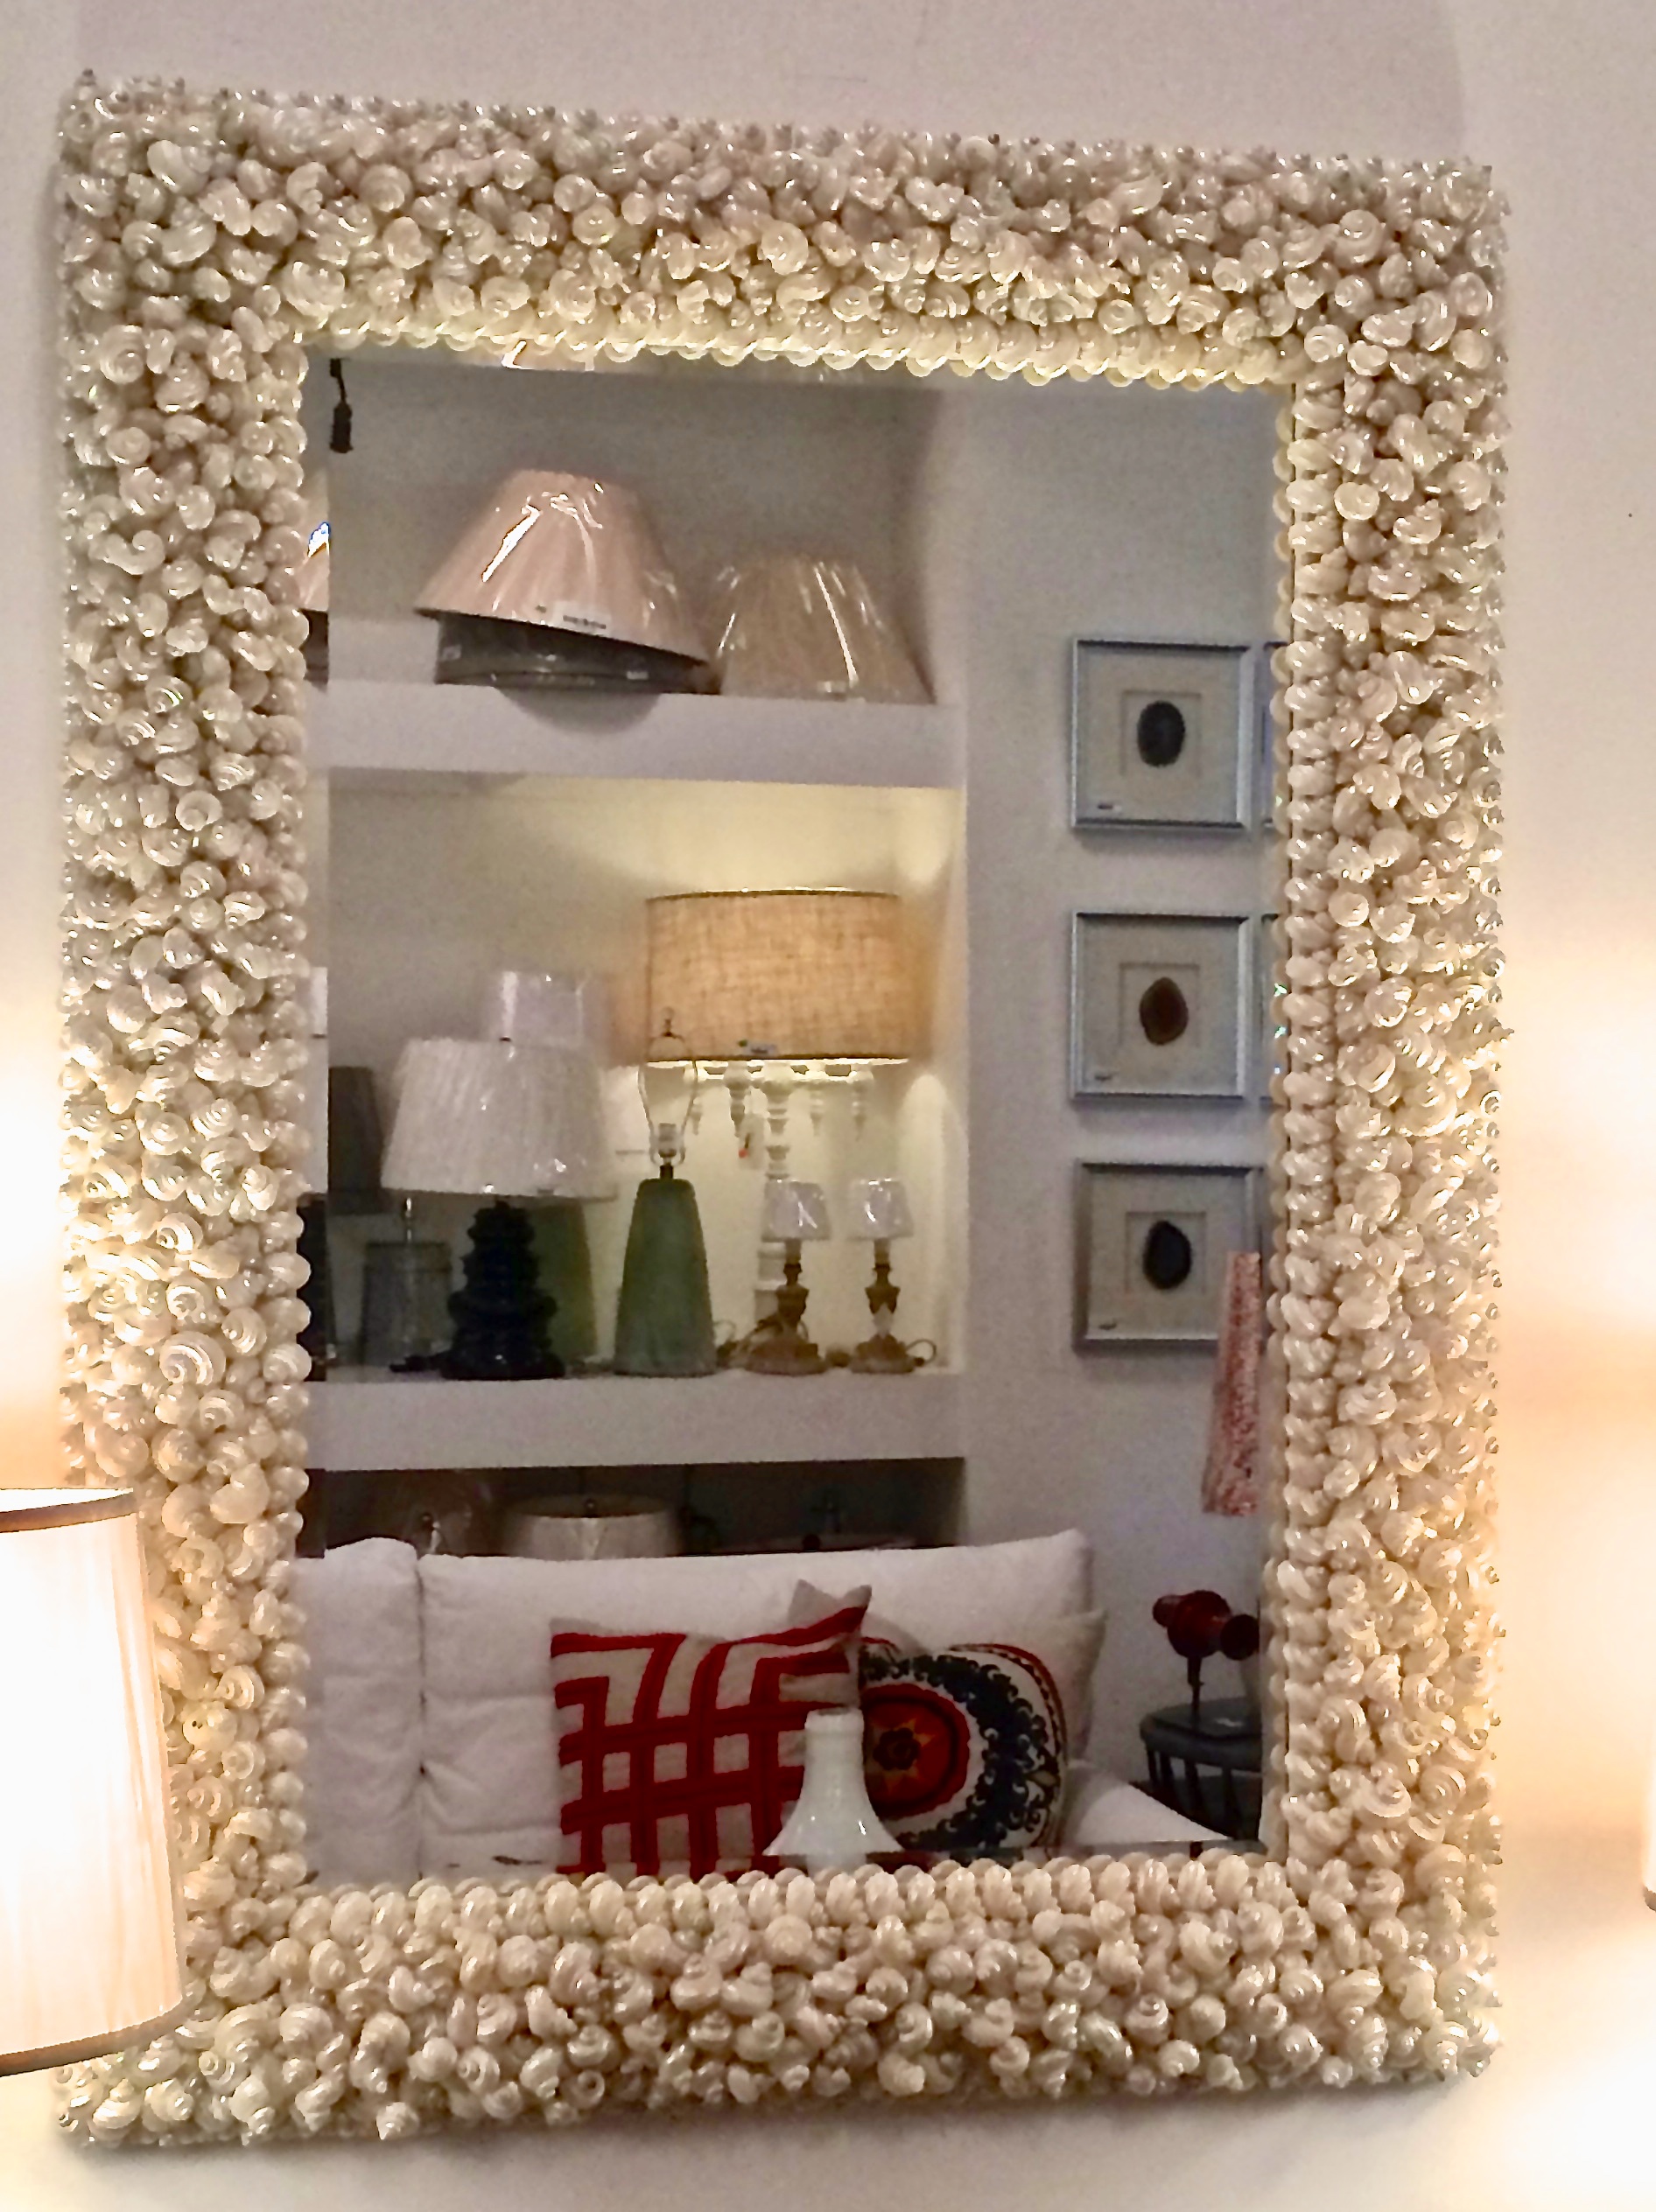 Reflections of a white sofa and lamps for sale in a furniture shop in a mirror made with white seashells.